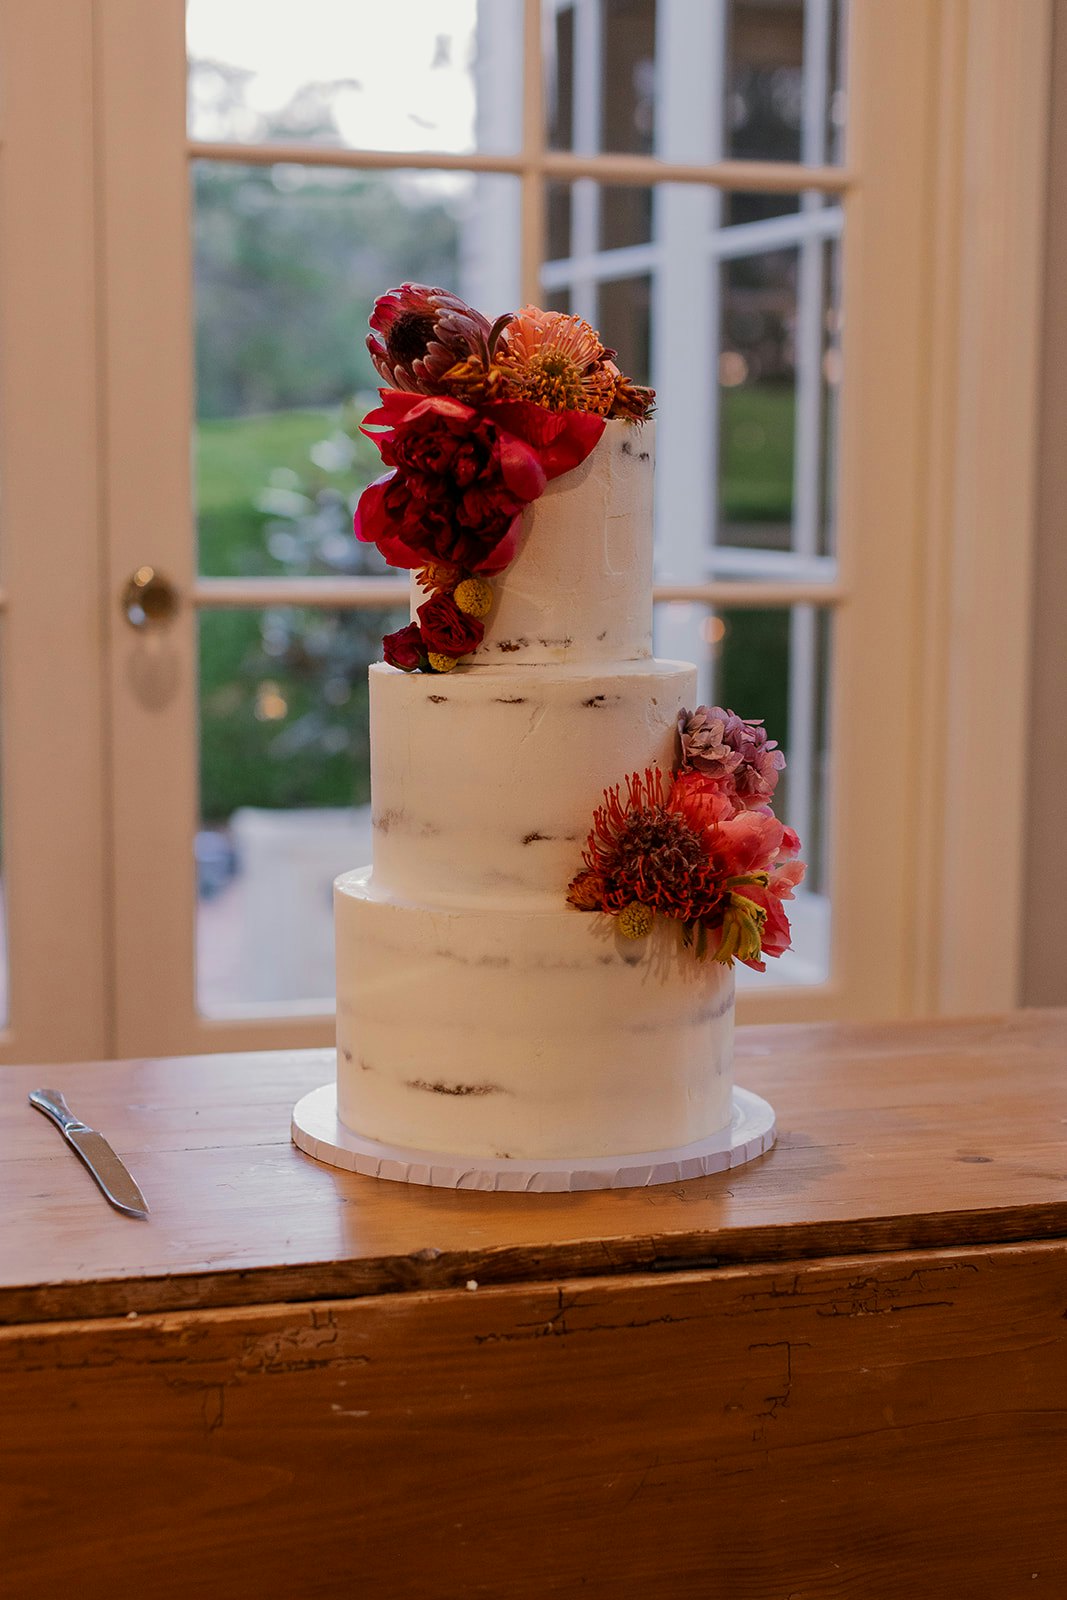 Wedding cake with flowers on it